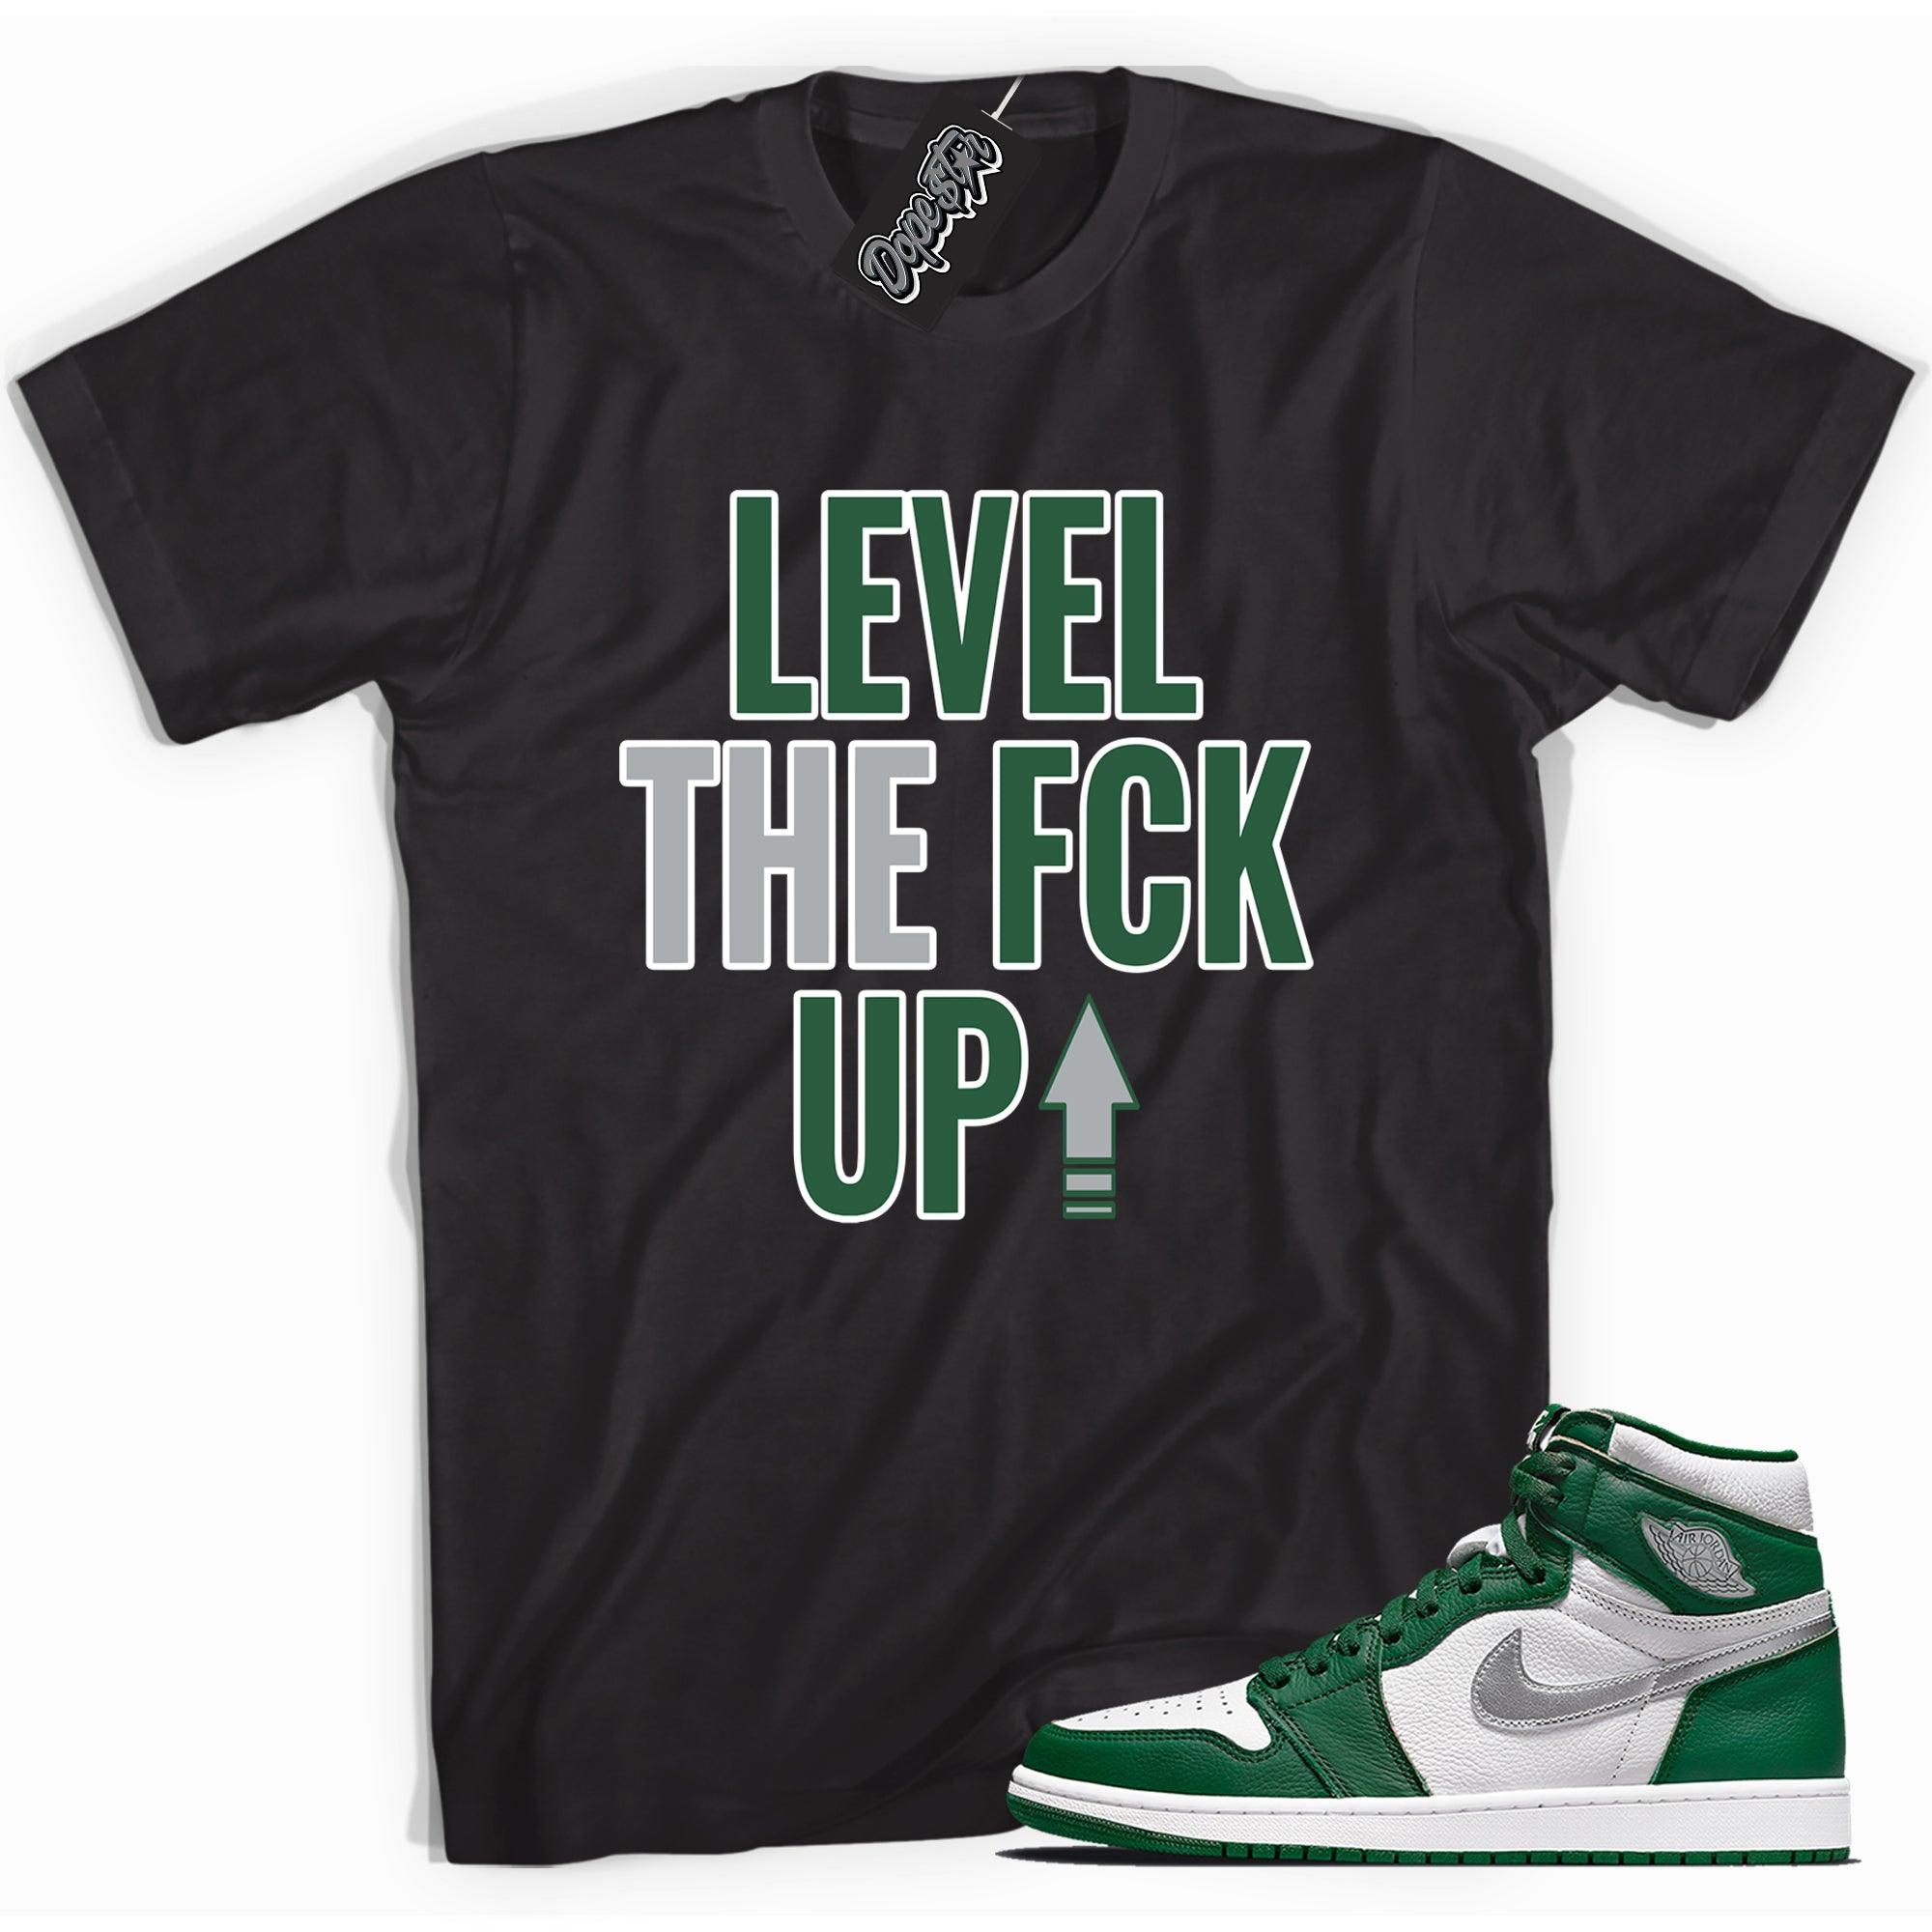 Cool black graphic tee with 'Level Up' print, that perfectly matches Air Jordan 1 Retro High OG Gorge Green sneakers.